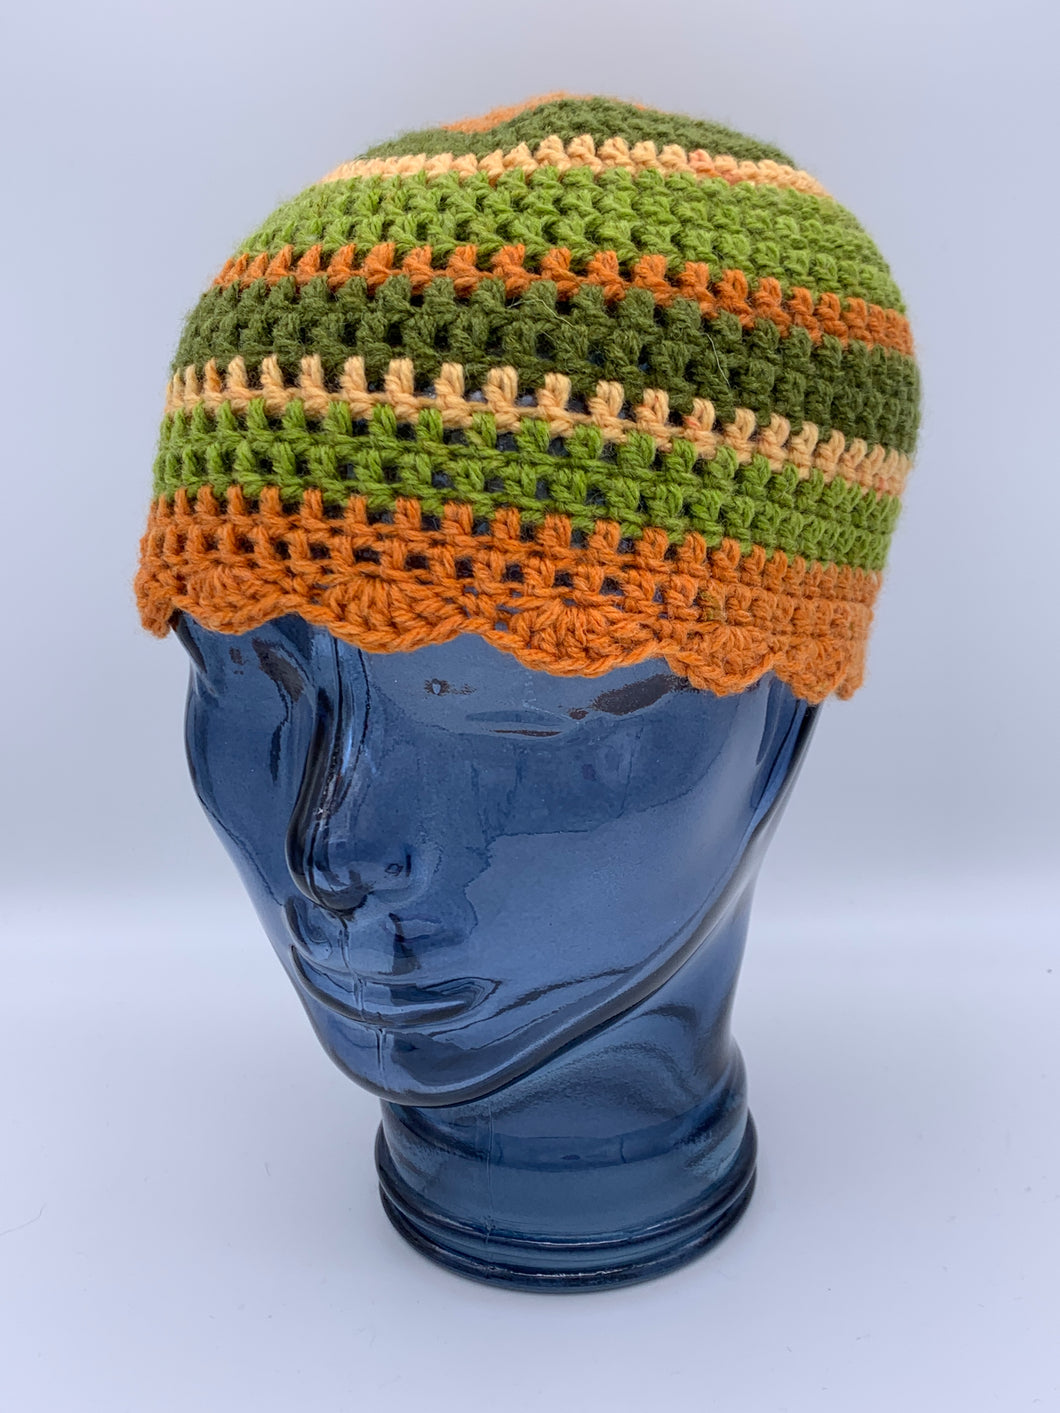 Crochet striped green and orange beanie hat with scalloped edge- Size Teen/Small adult